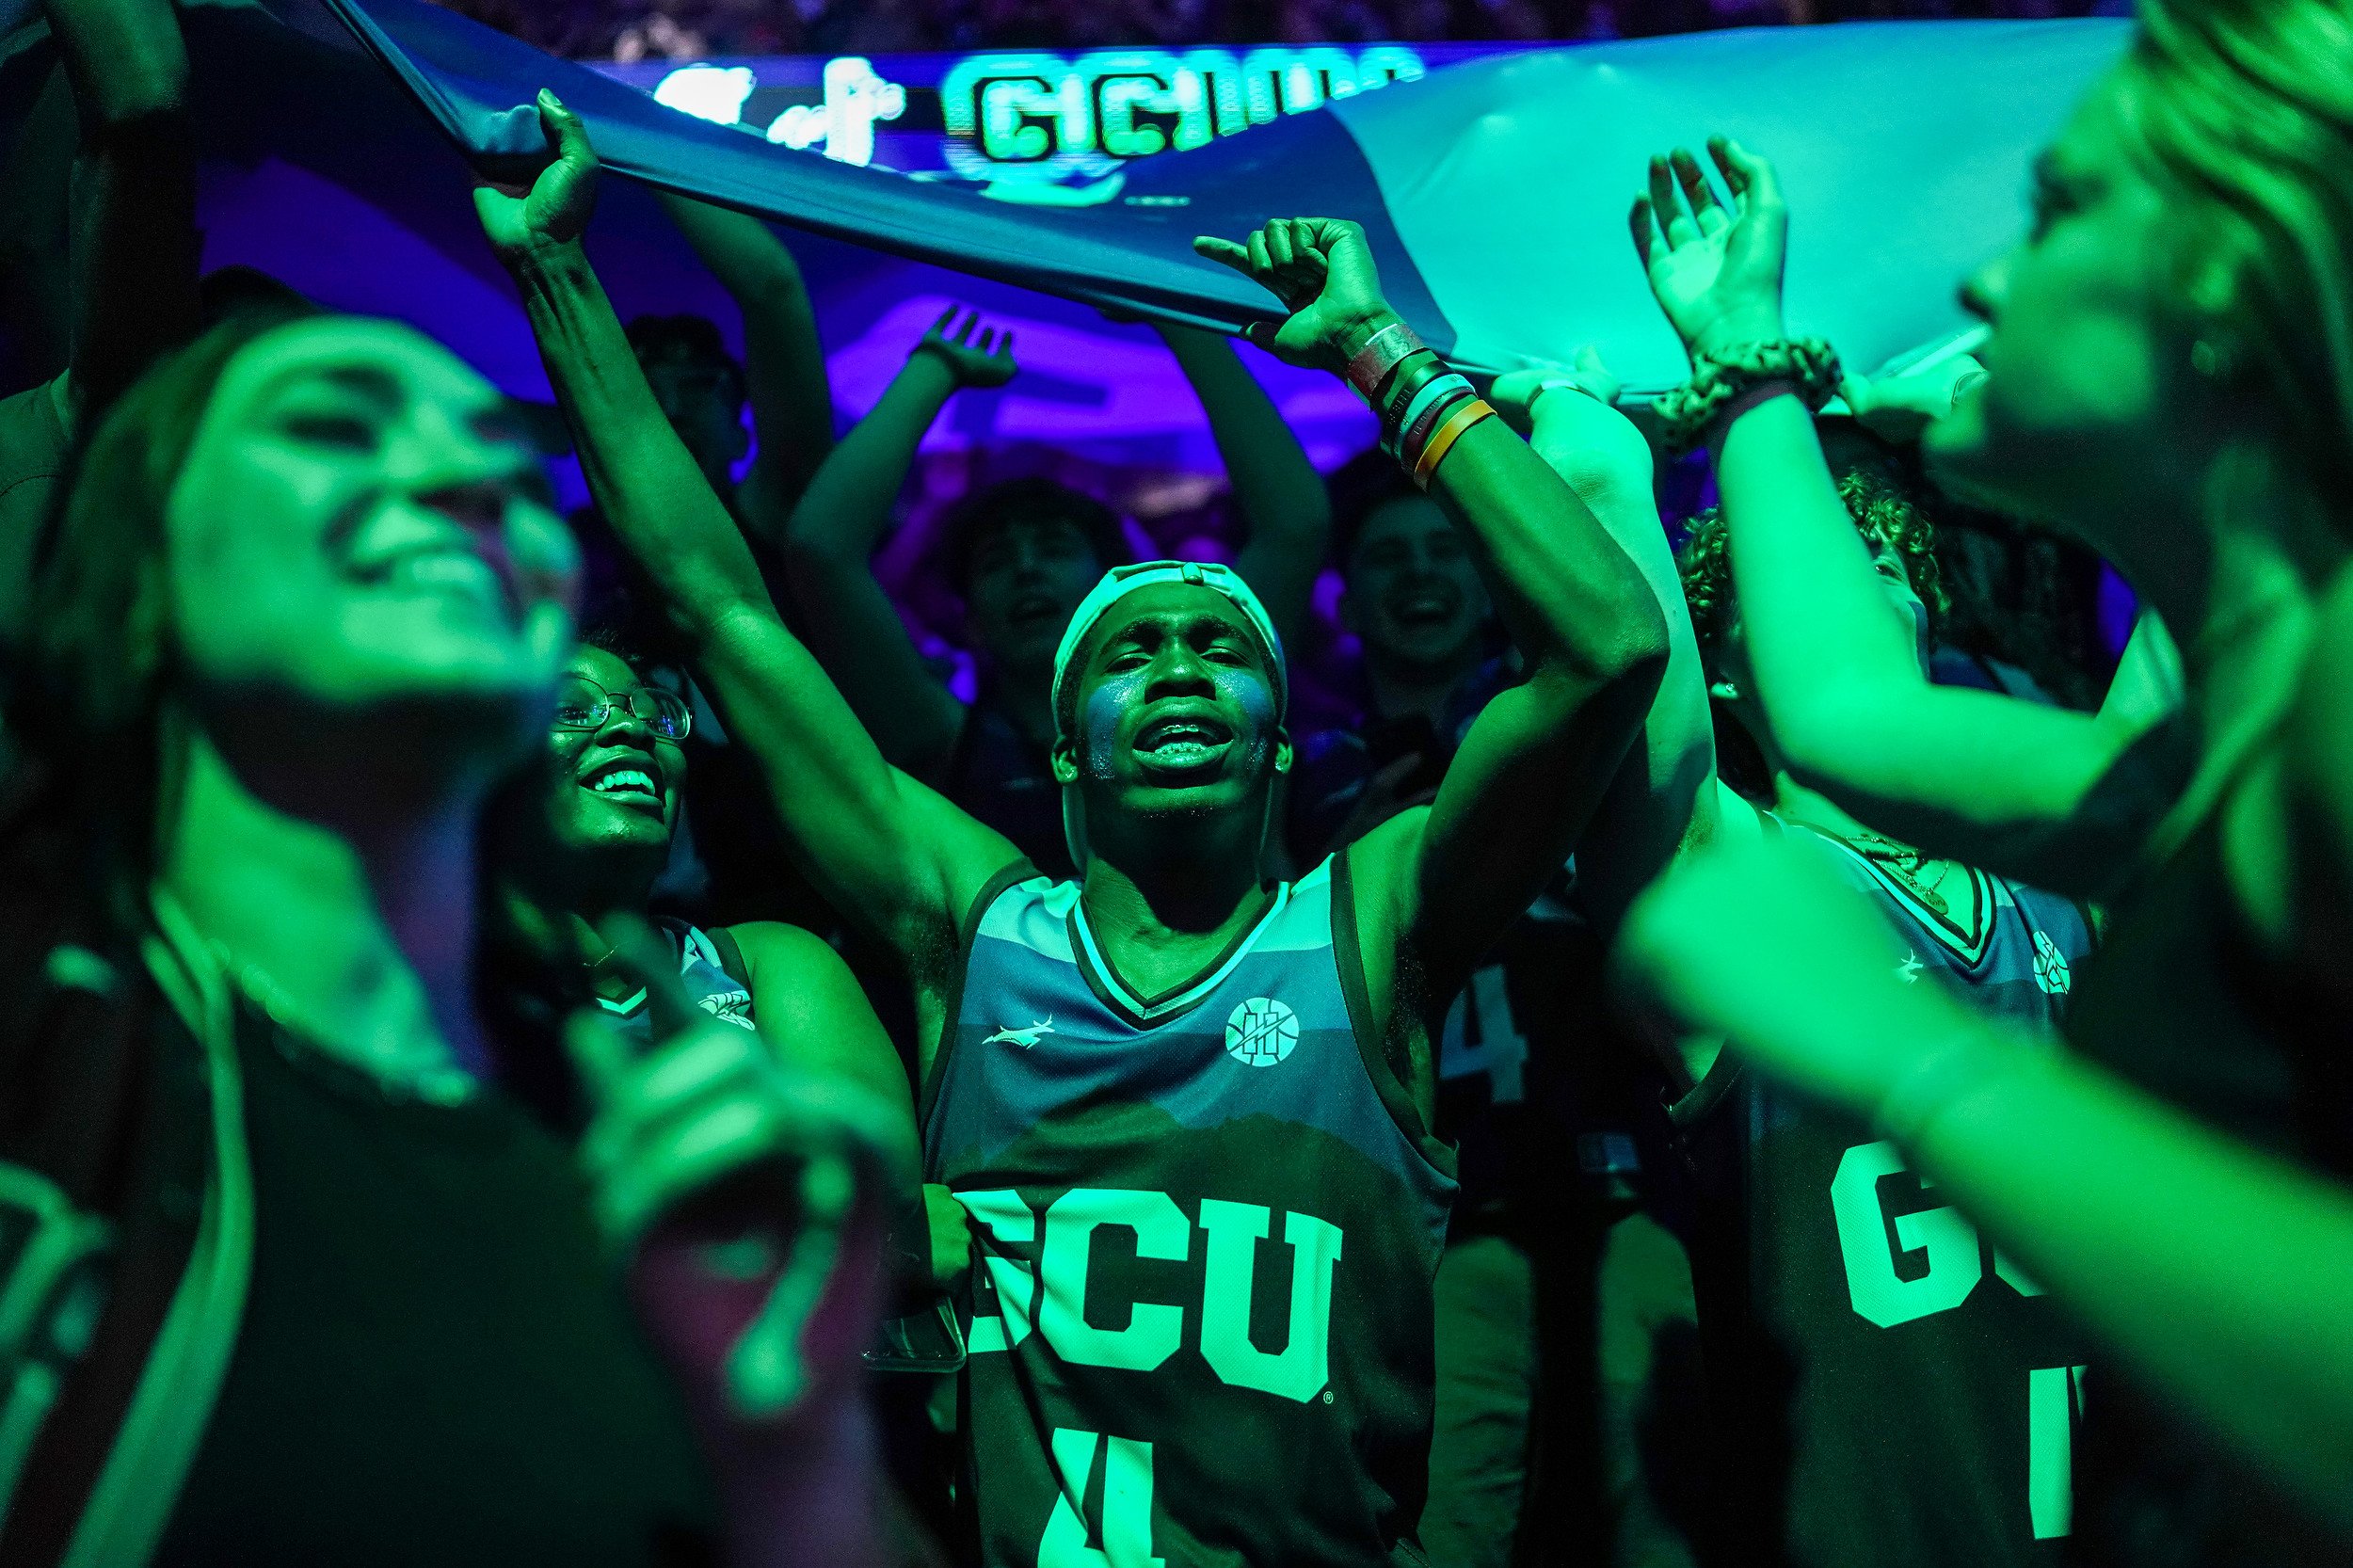  Levi Gue, at center, cheers with Grand Canyon University students dressed in Halloween costumes as they wait for the start of the first half against Western New Mexico University at Grand Canyon University Arena on Saturday, Oct. 30, 2021, in Phoeni